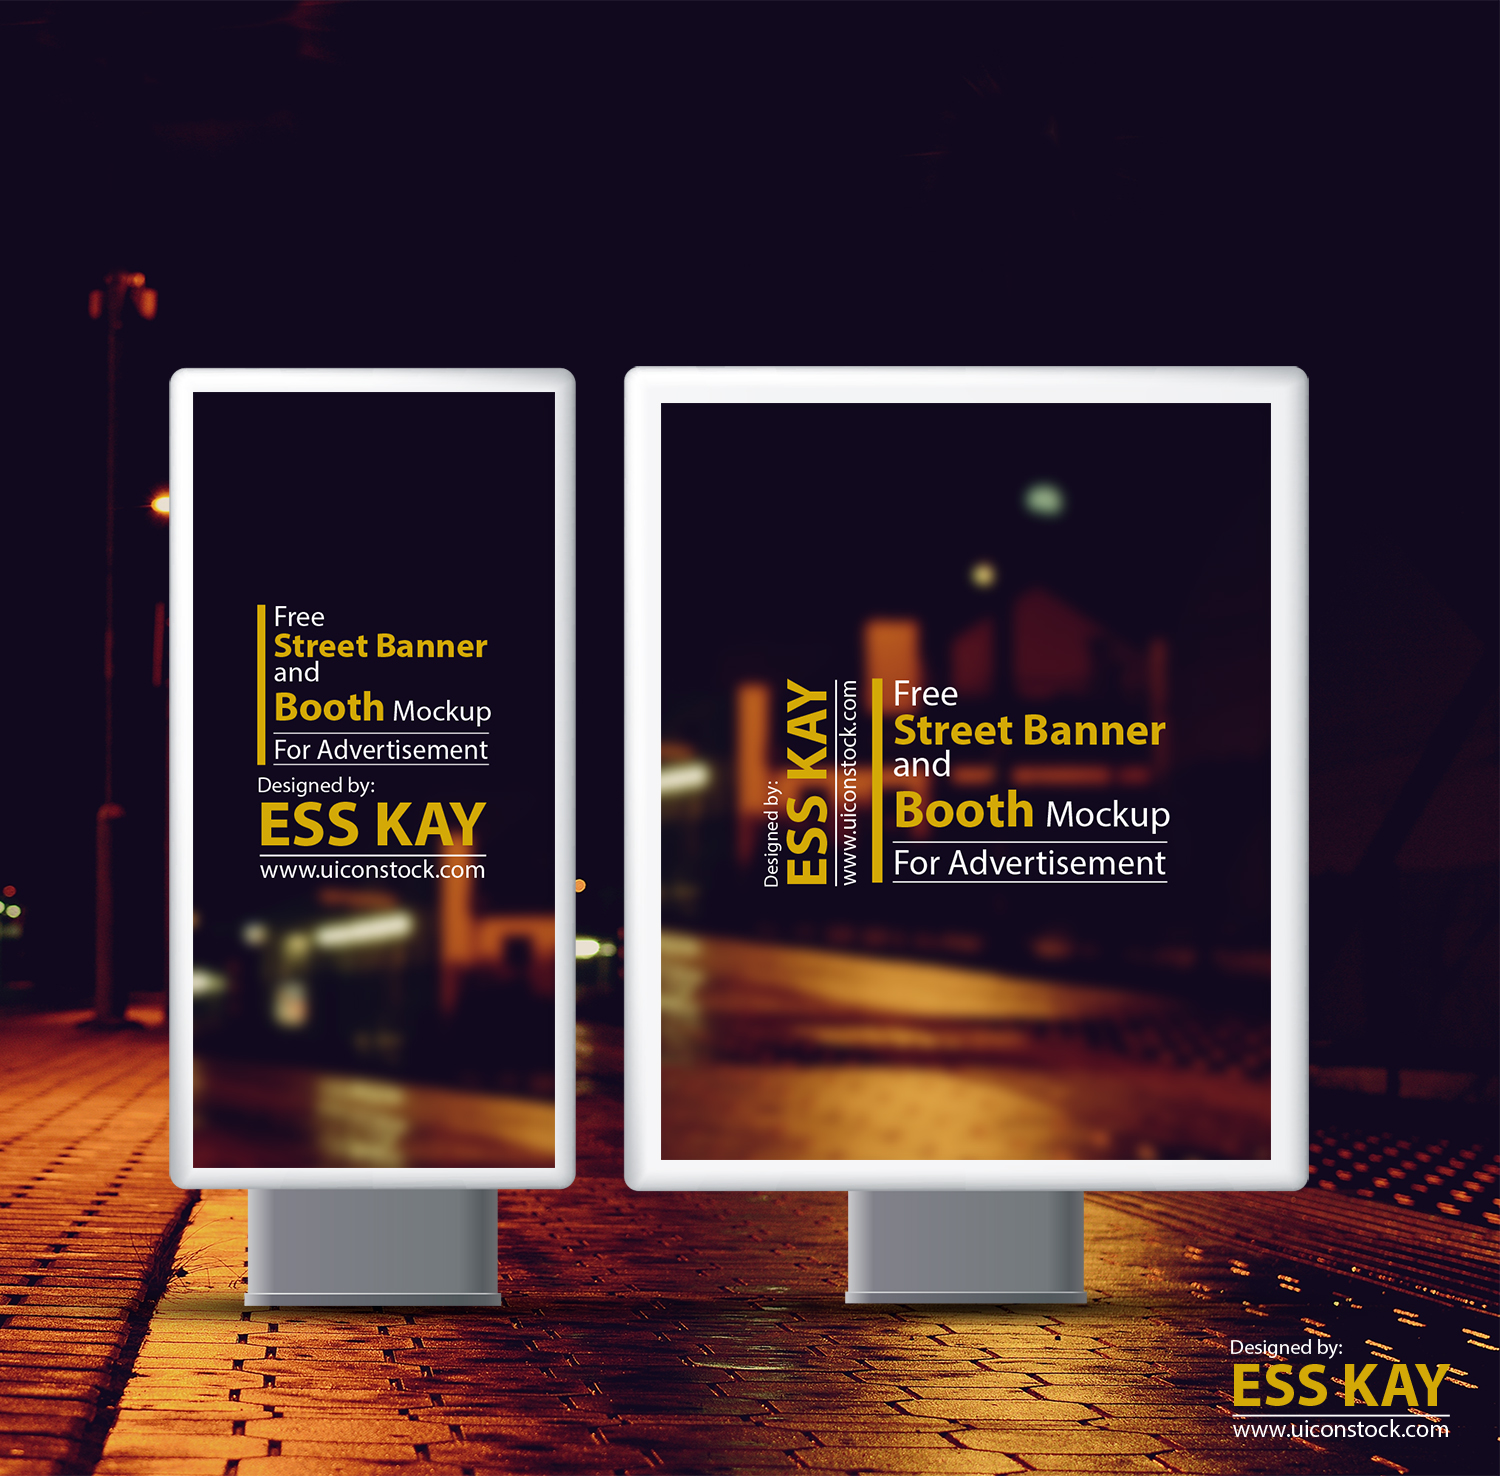 Free Street Banner and Booth Mockup For Advertisement